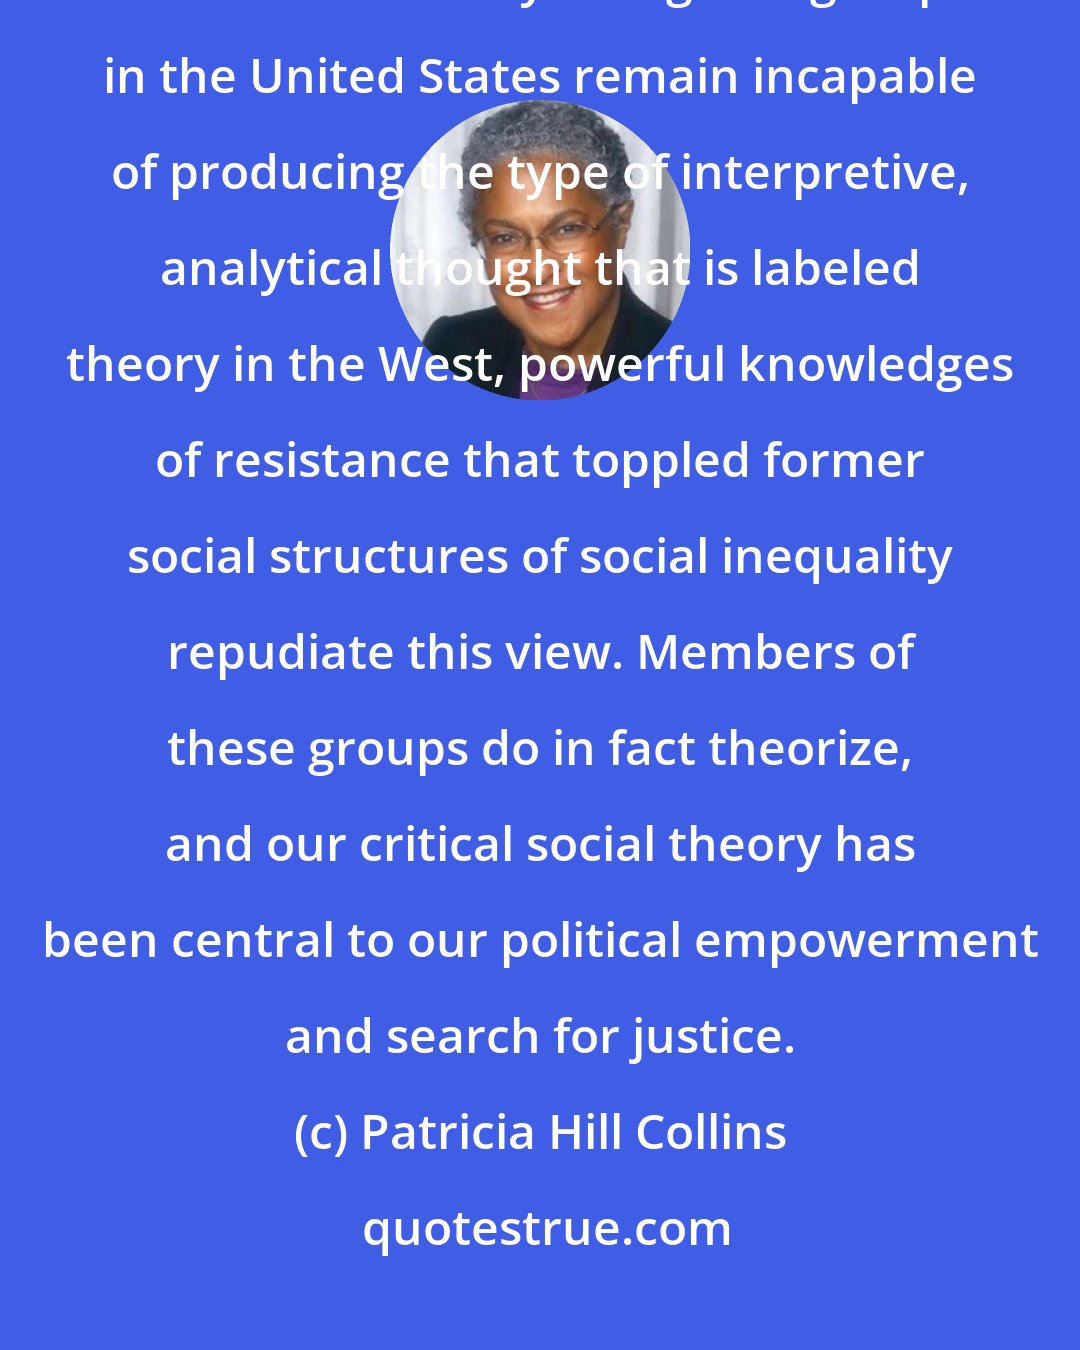 Patricia Hill Collins: Despite long-standing claims by elites that Blacks, women, Latinos, and other similarly derogated groups in the United States remain incapable of producing the type of interpretive, analytical thought that is labeled theory in the West, powerful knowledges of resistance that toppled former social structures of social inequality repudiate this view. Members of these groups do in fact theorize, and our critical social theory has been central to our political empowerment and search for justice.